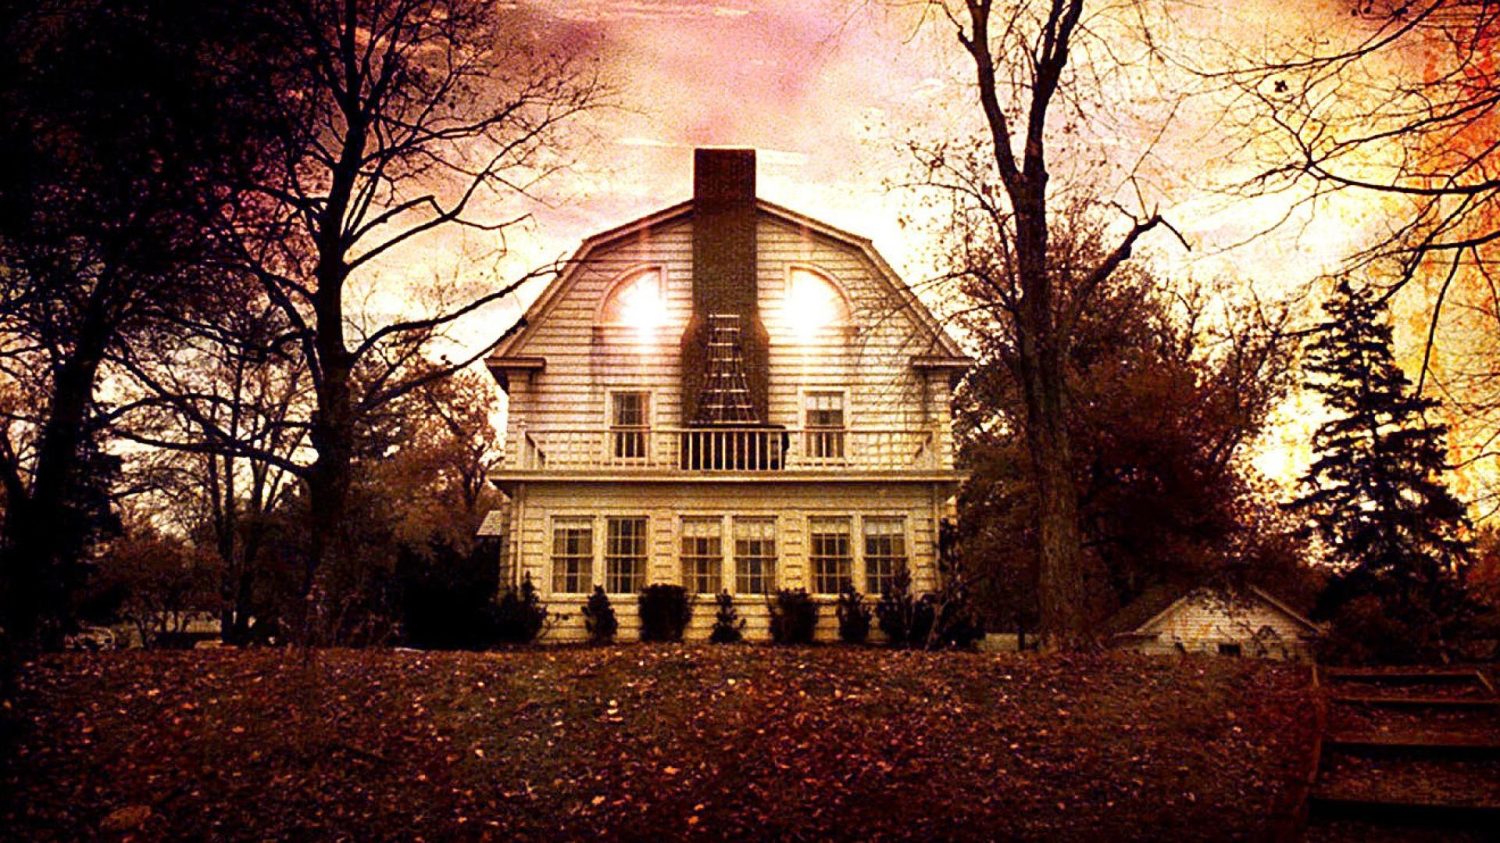 The Amityville Horror House And The True Story Of Terror Through 30+ Pictures